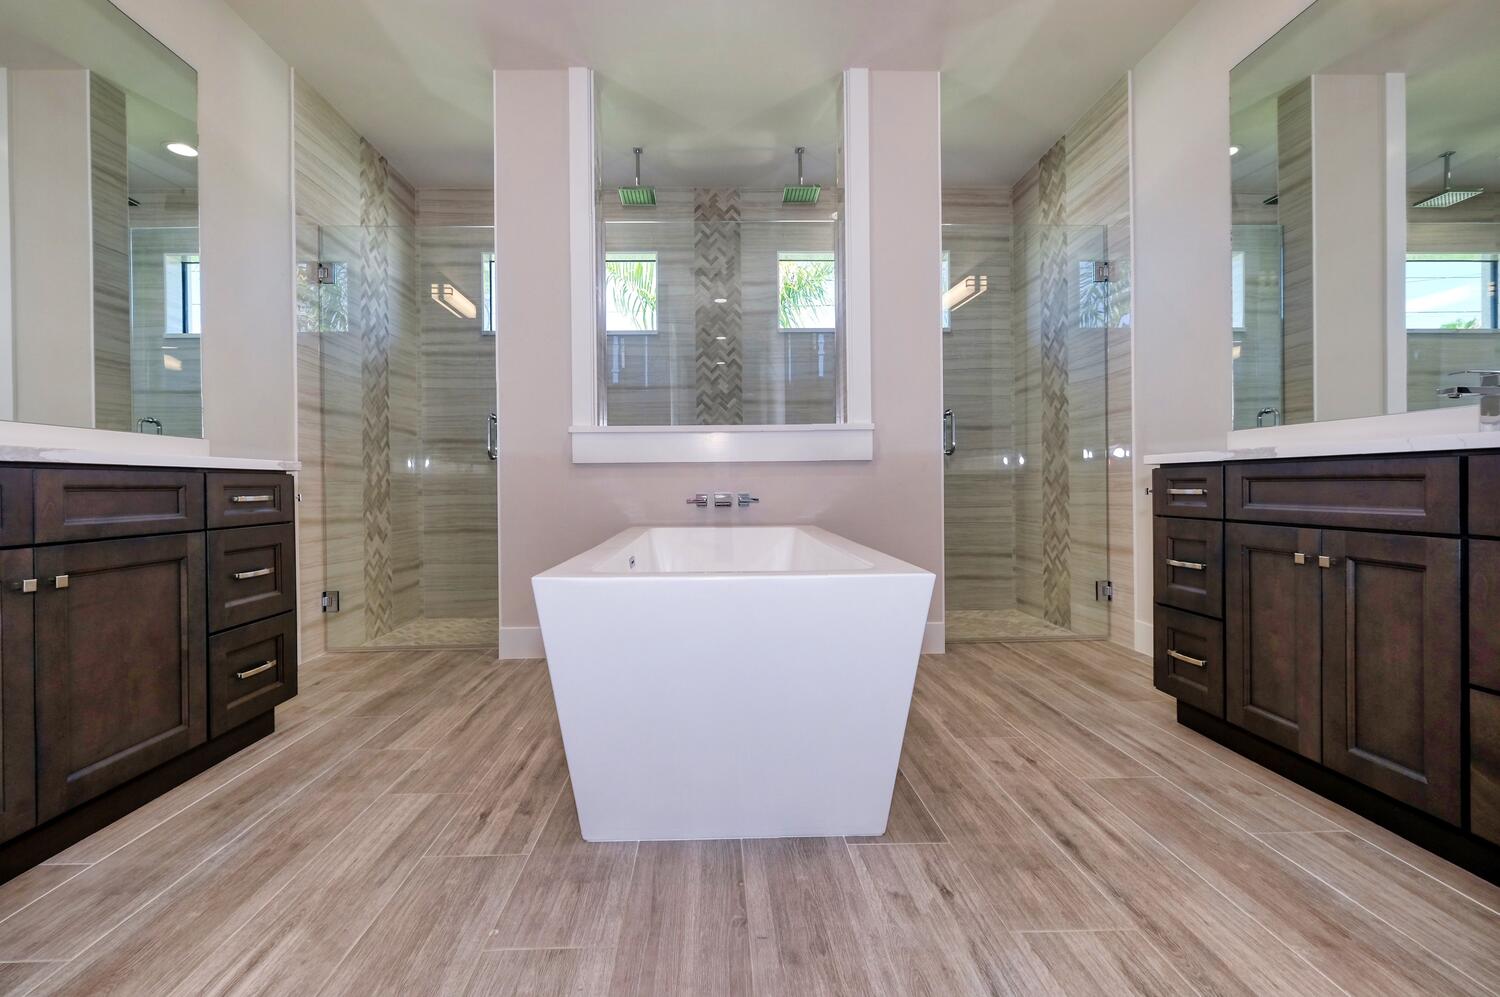 Picture of the primary bathroom of the model home Serenity